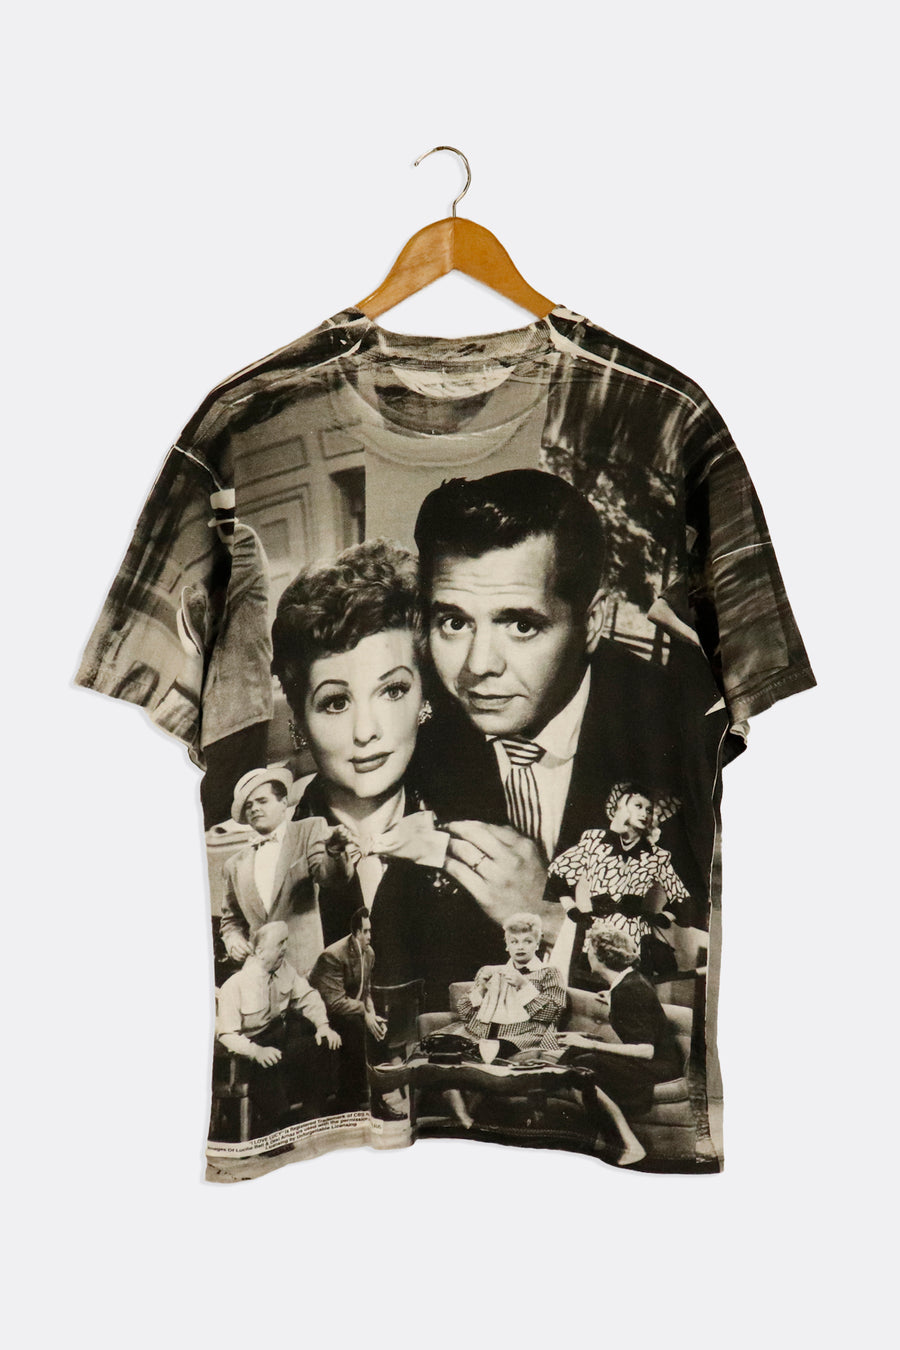 Vintage I Love Lucy Different Shots From Show Black And White All Over Graphic T Shirt Sz L